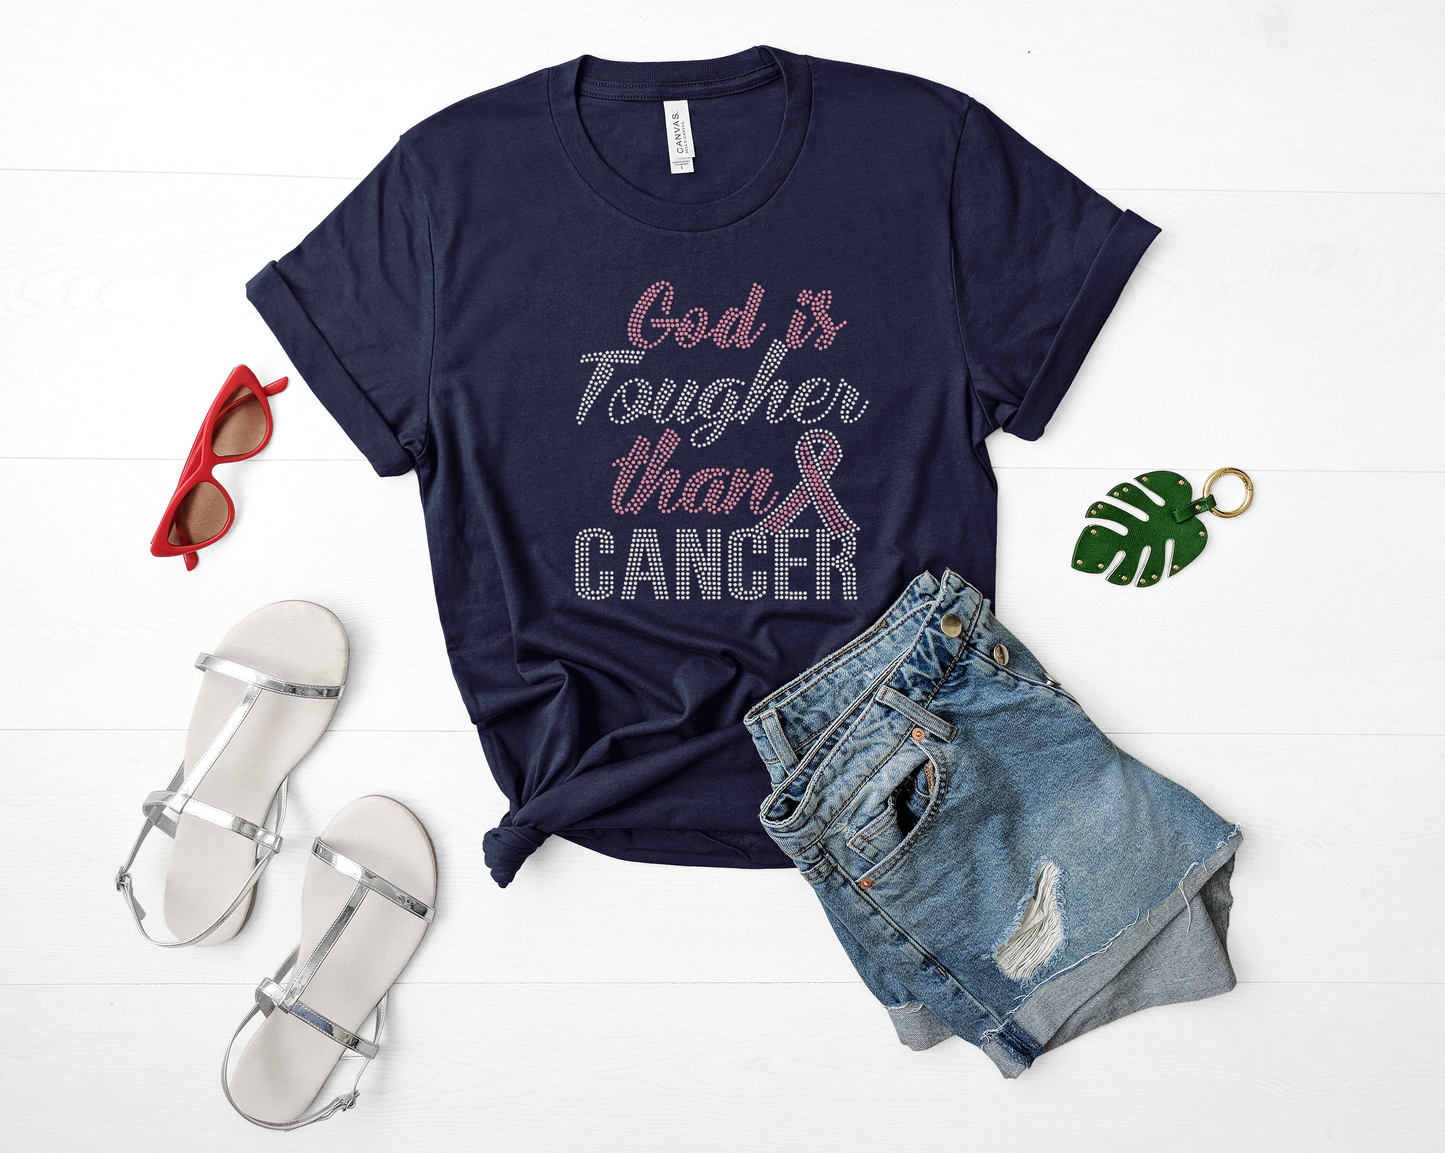 God is tougher than cancer